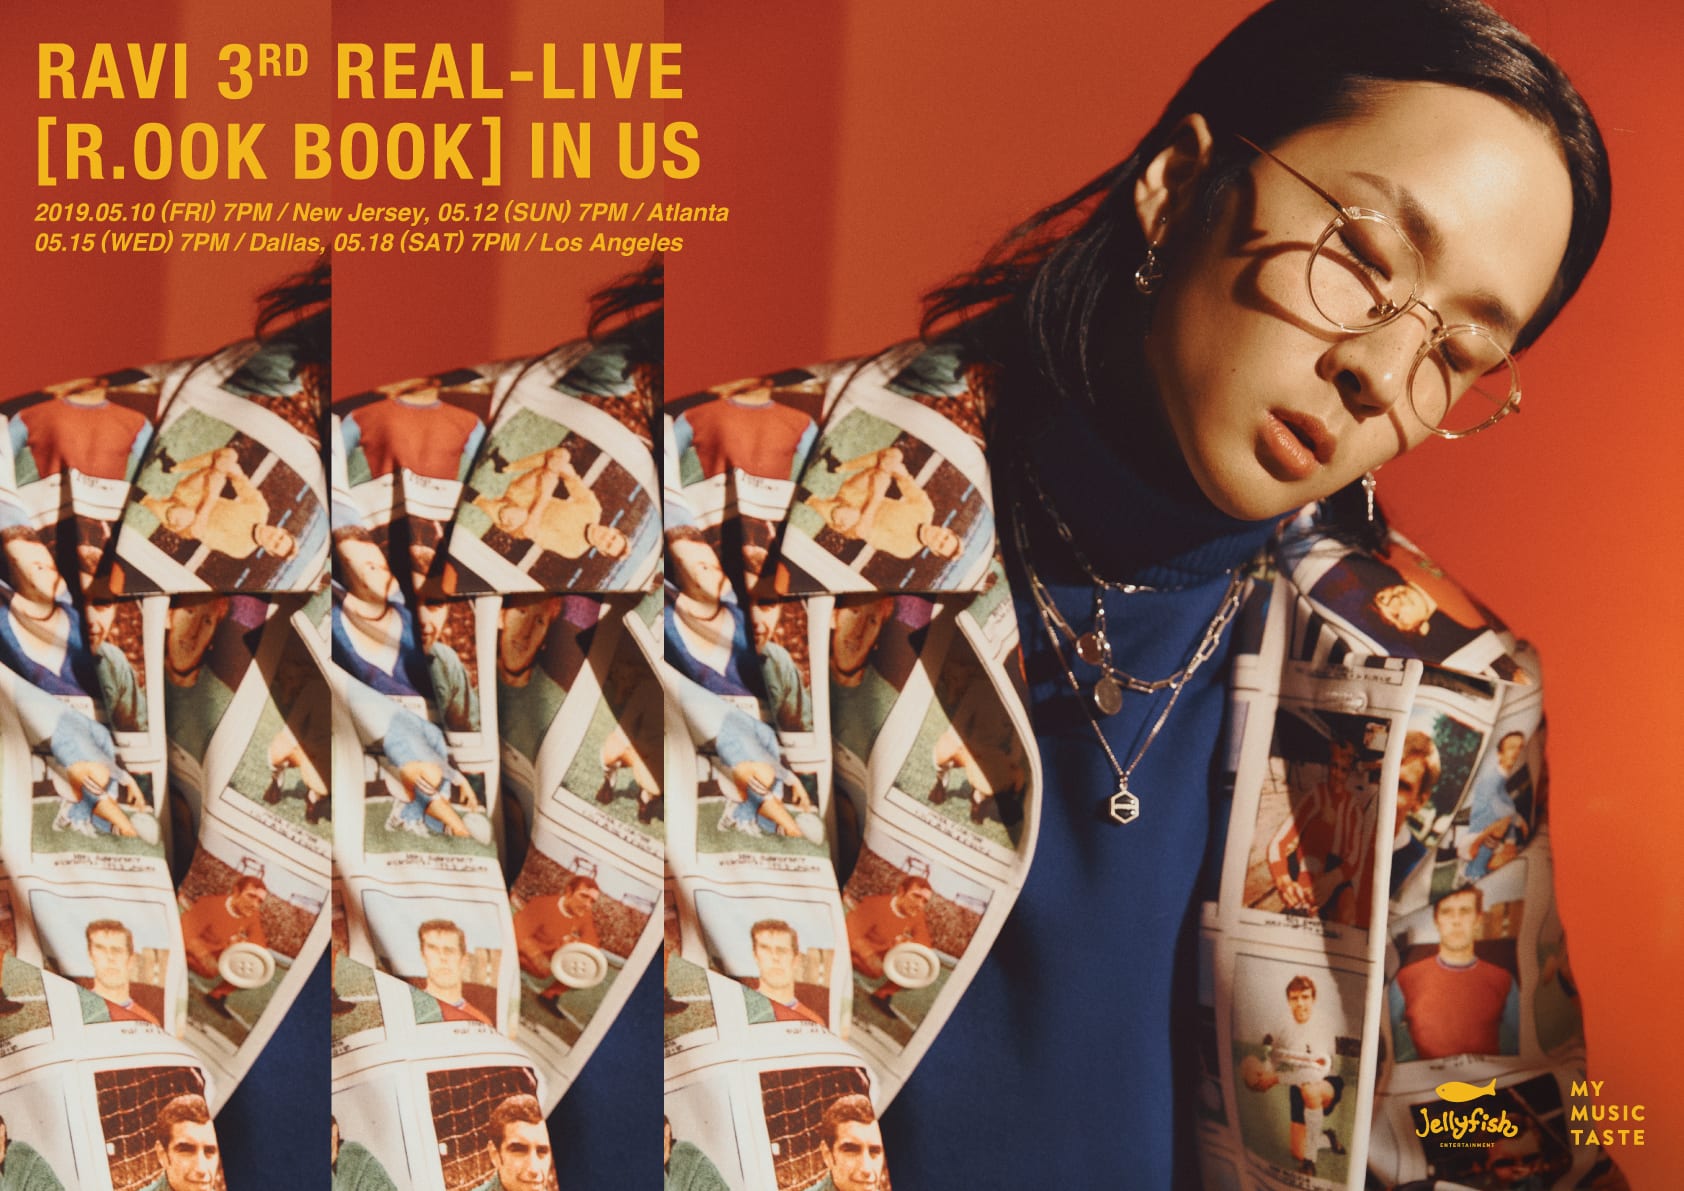 RAVI 3RD REAL-LIVE "R.OOK BOOK" IN US (tour poster)